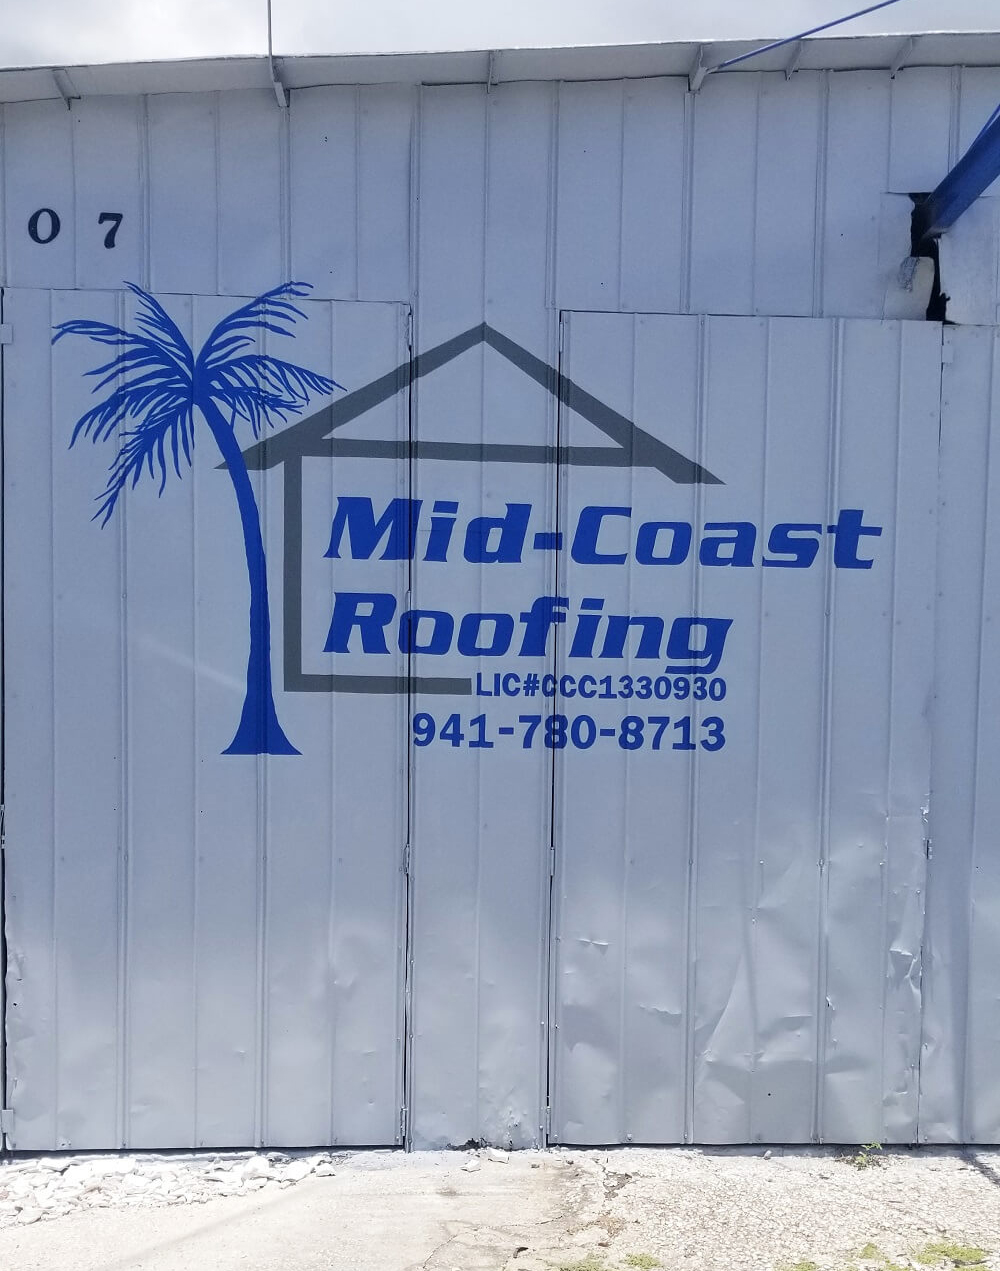 Mid Coast Roofing Logo Painted on a White Metal Wall